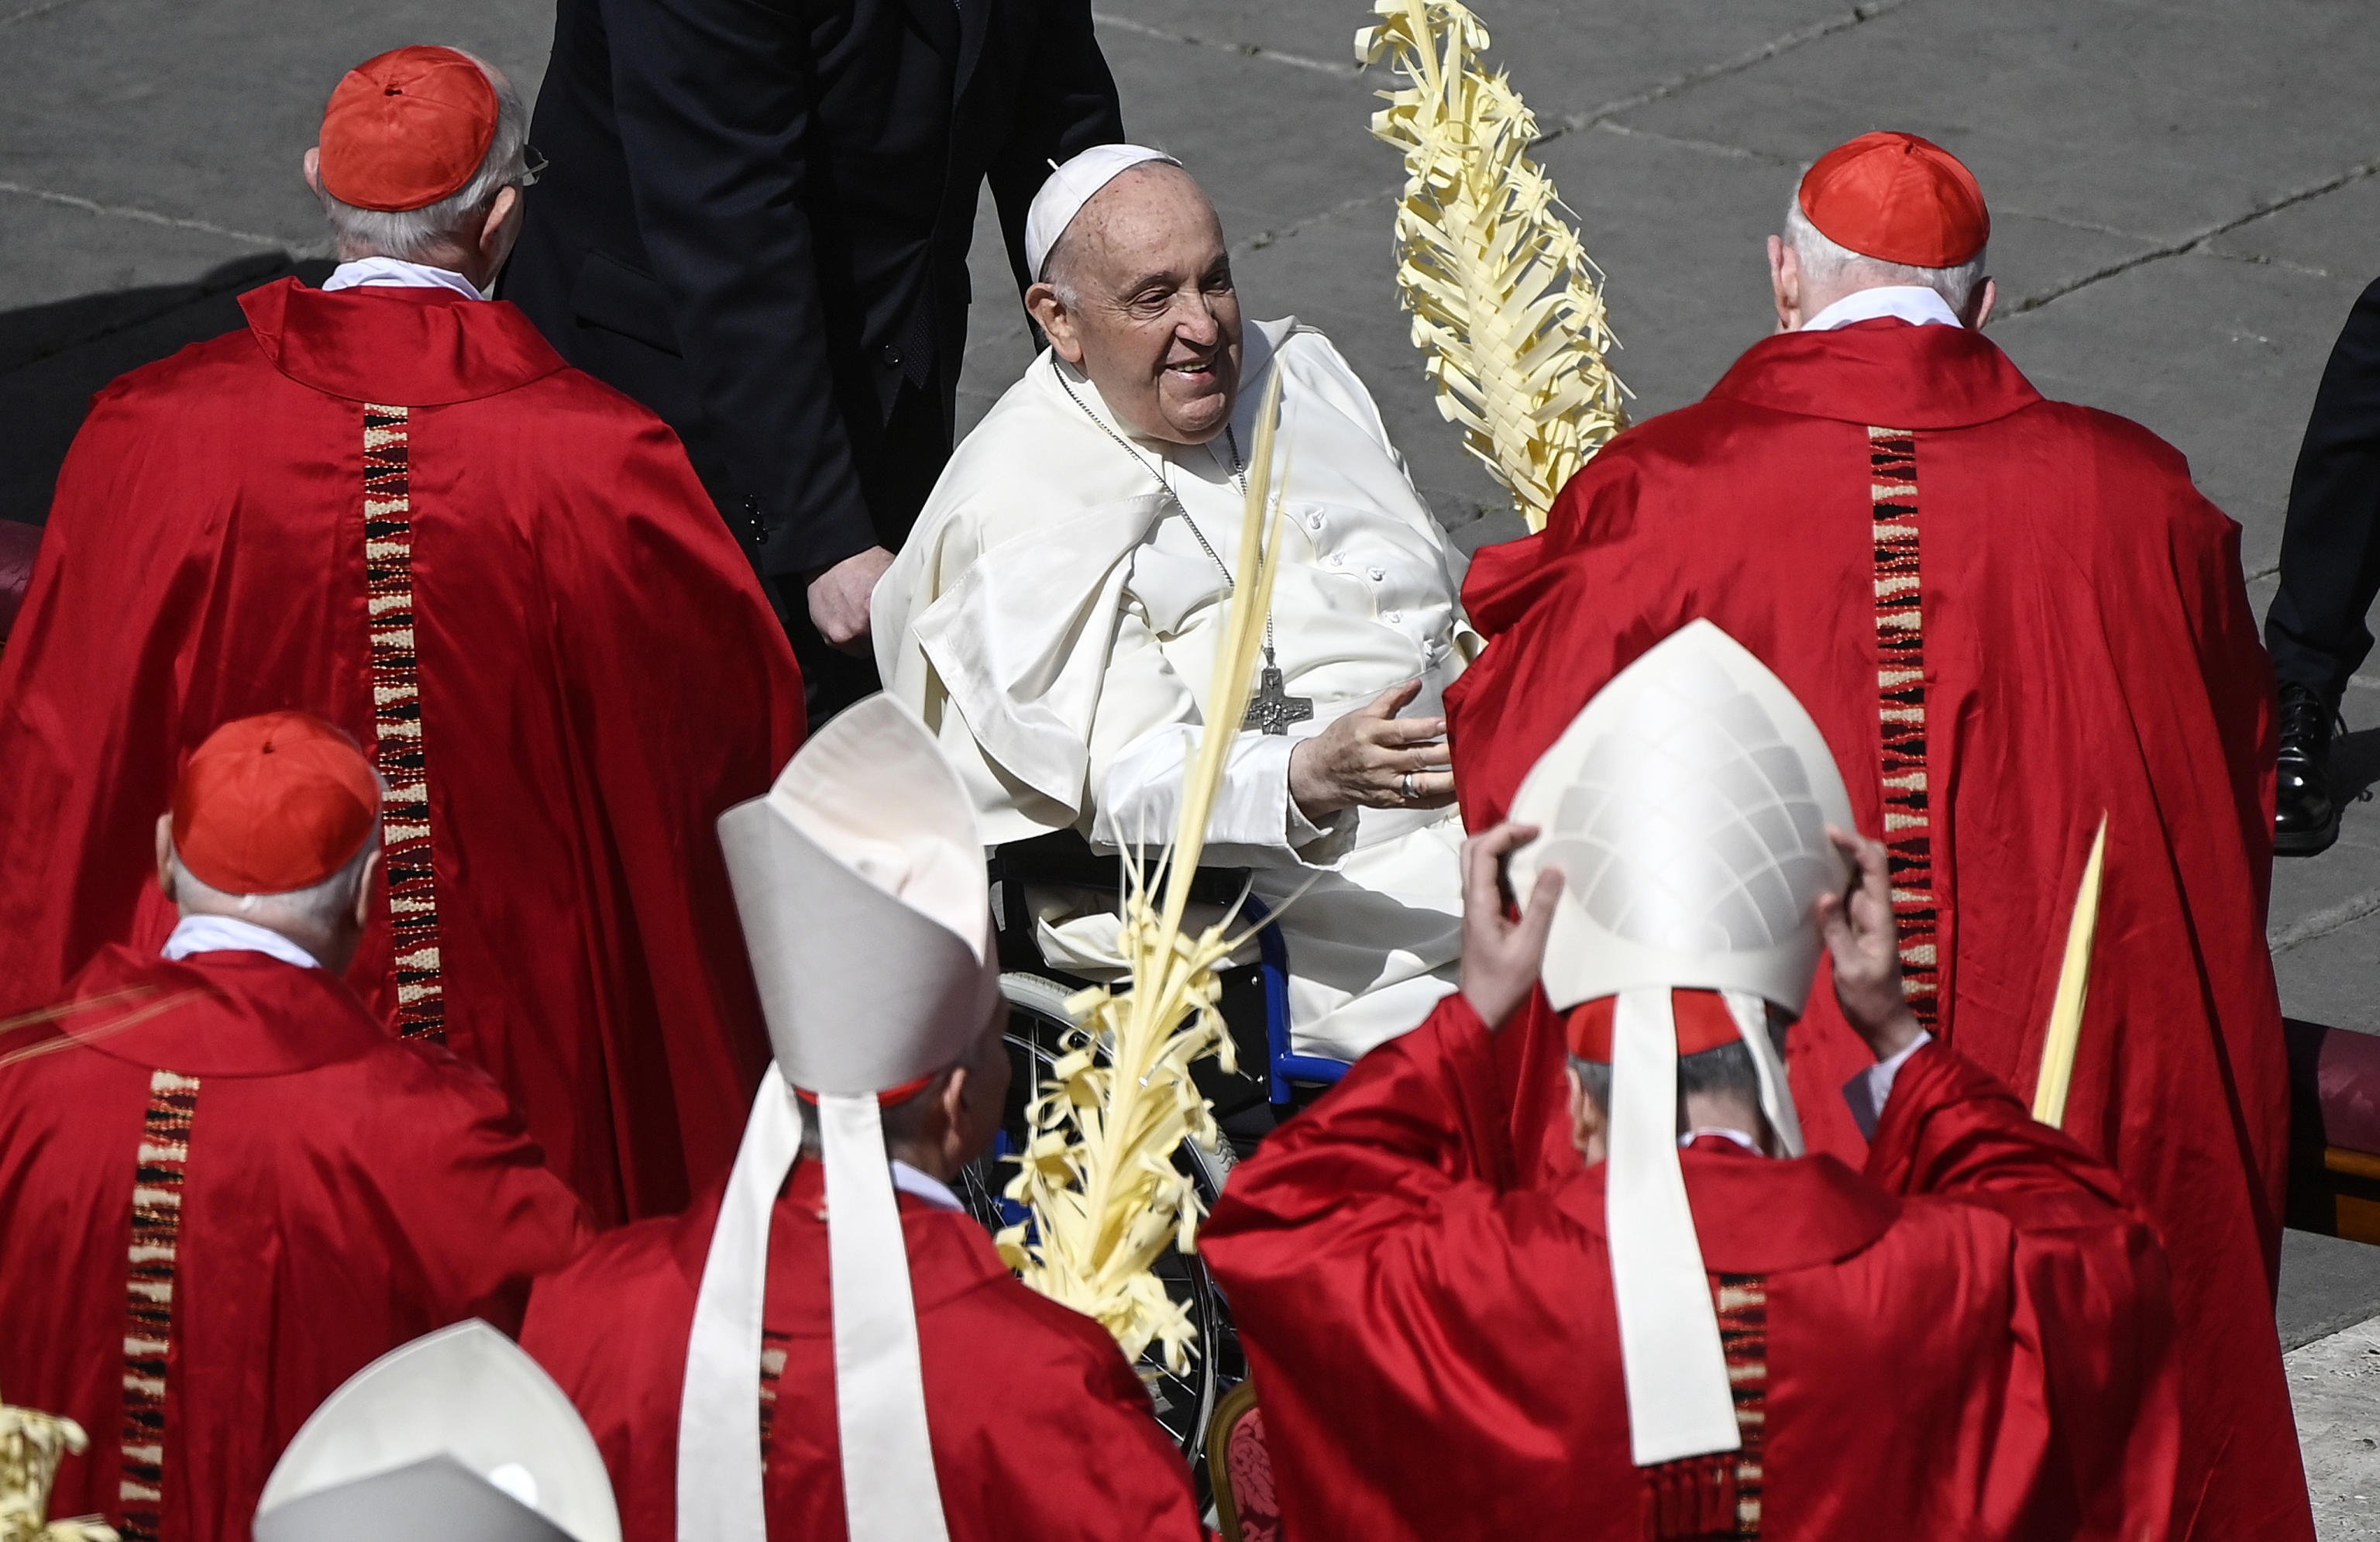 Pope Francis greets cardinals in Saint Peter’s Square, Vatican City, Rome on Palm Sunday. Photo: EPA-EFE